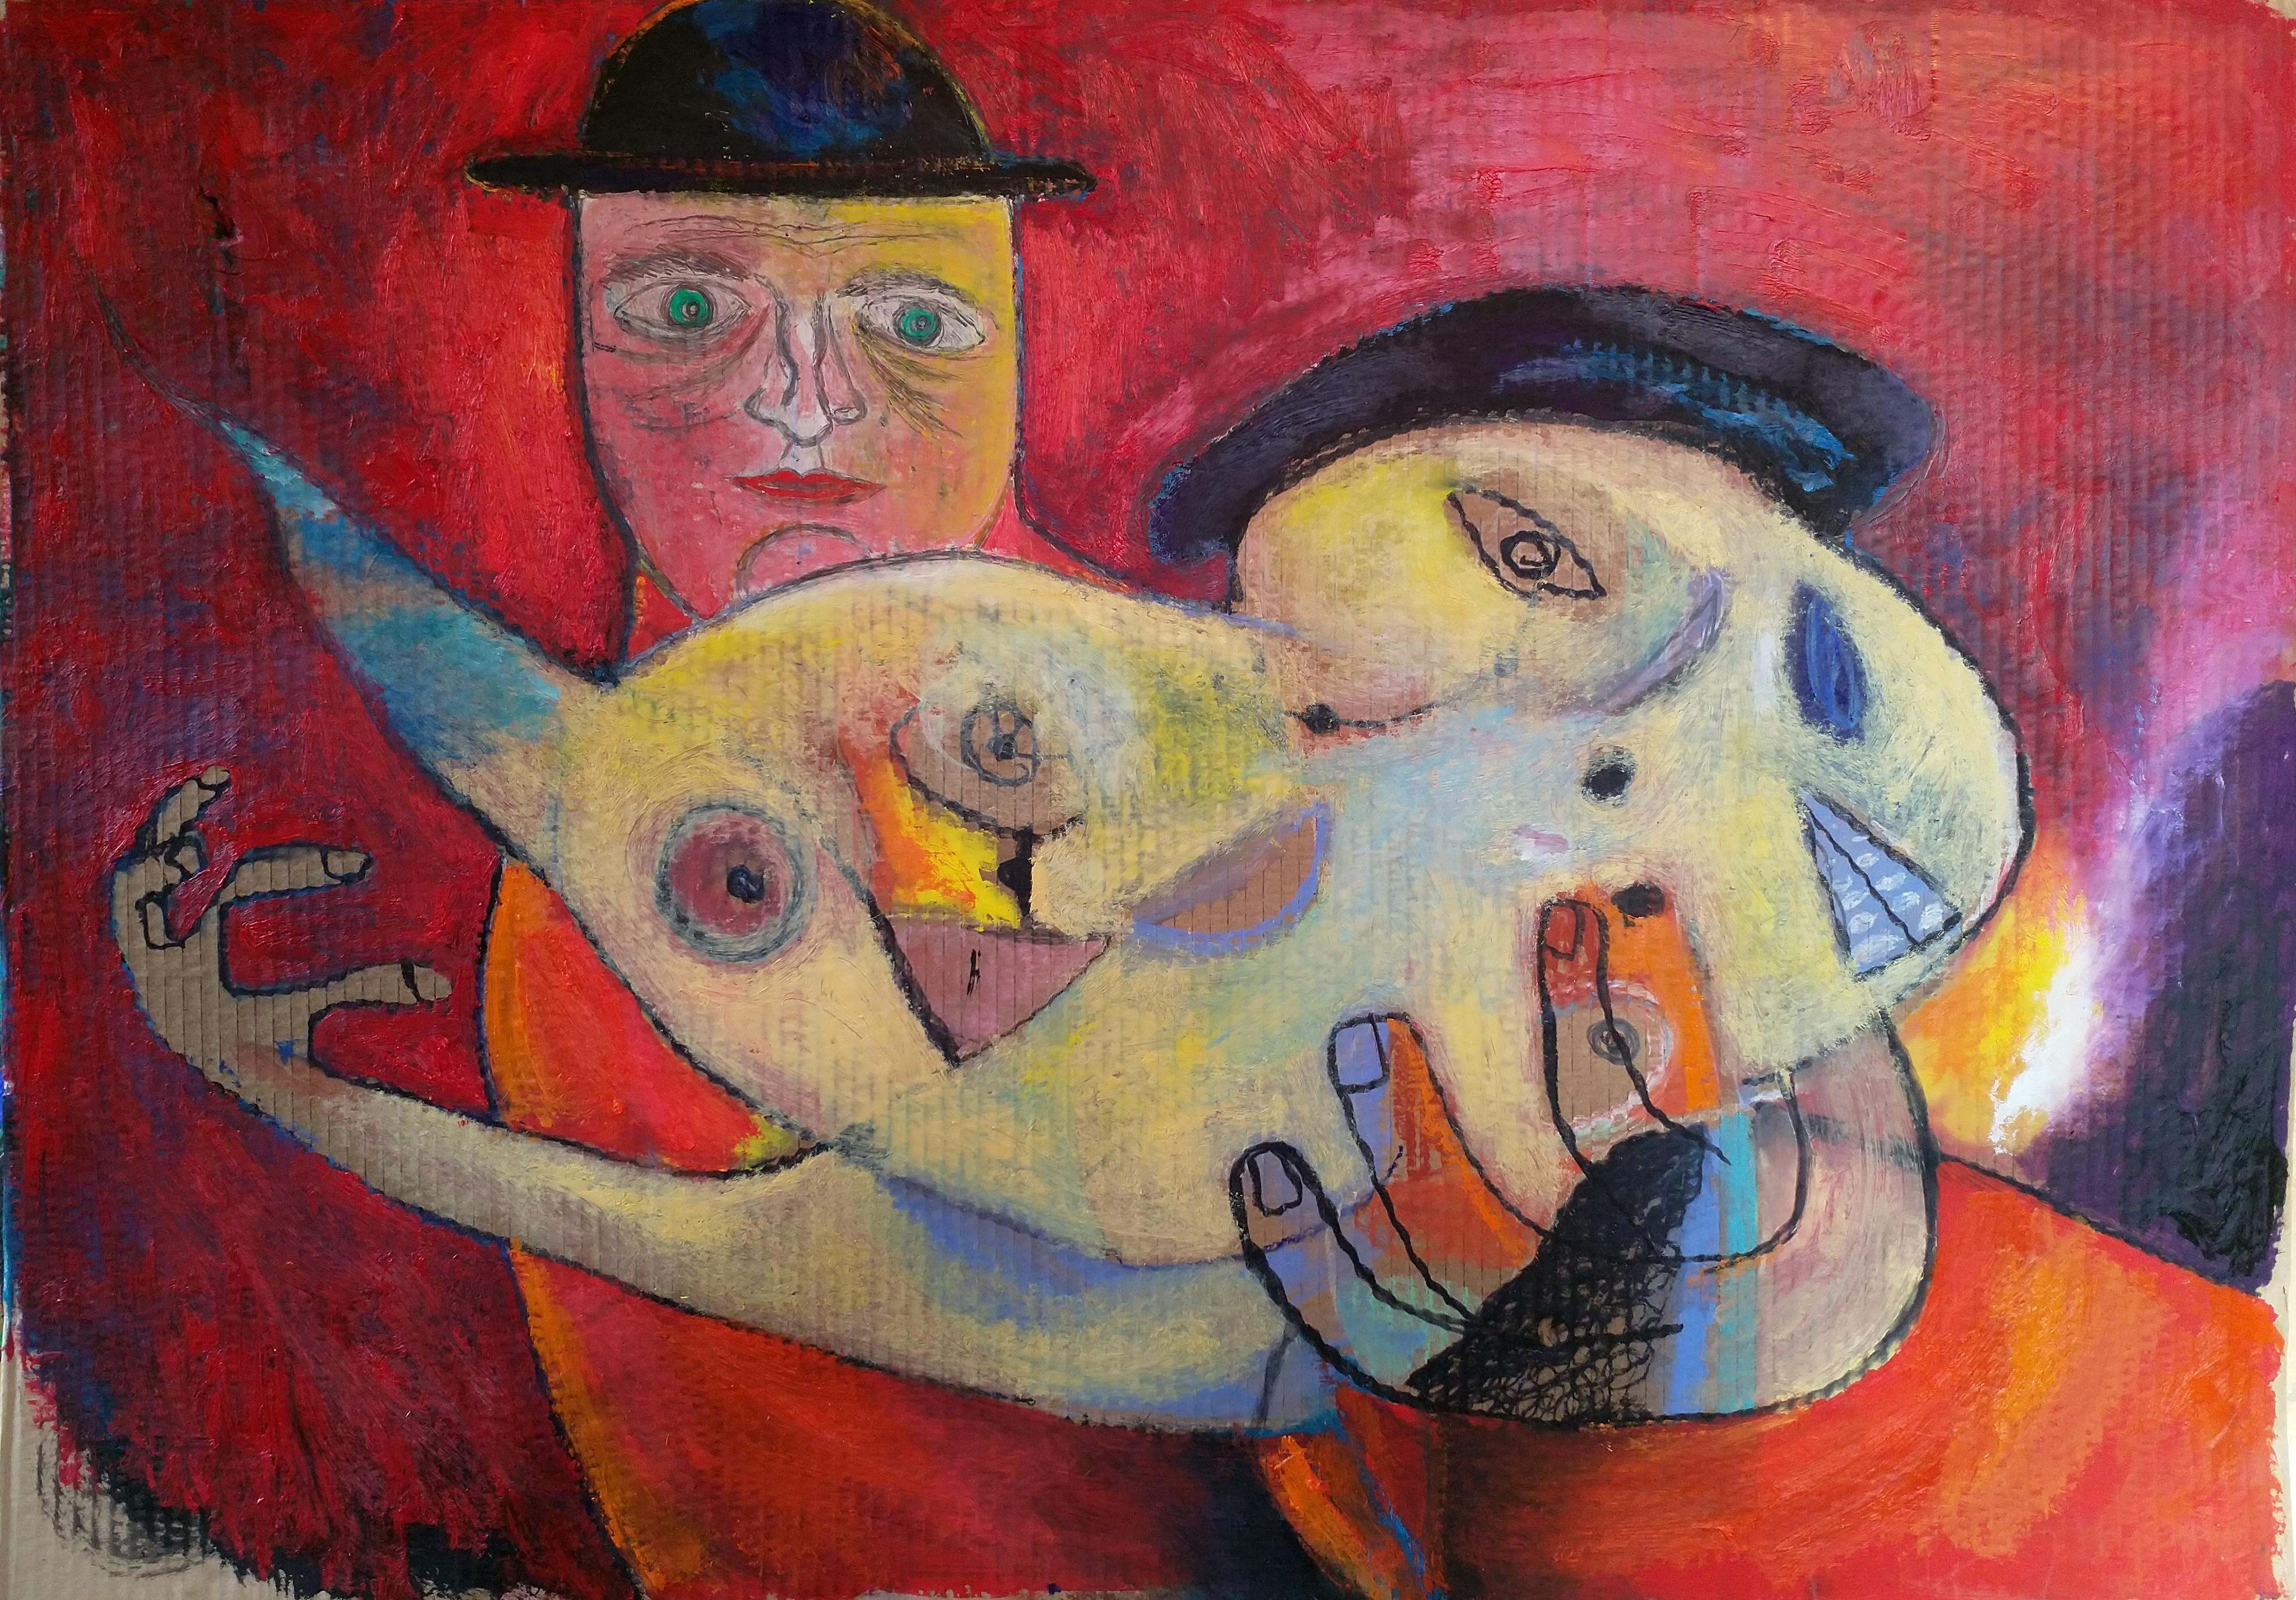 'Finding Some Miracle' by Szilard Szilagyi - figurative expressionist oil painting. This surrealist artwork will be shipped to your address from the artist's studio in Hungary. It will be delivered in a crate, ready to be placed on a wall. You will